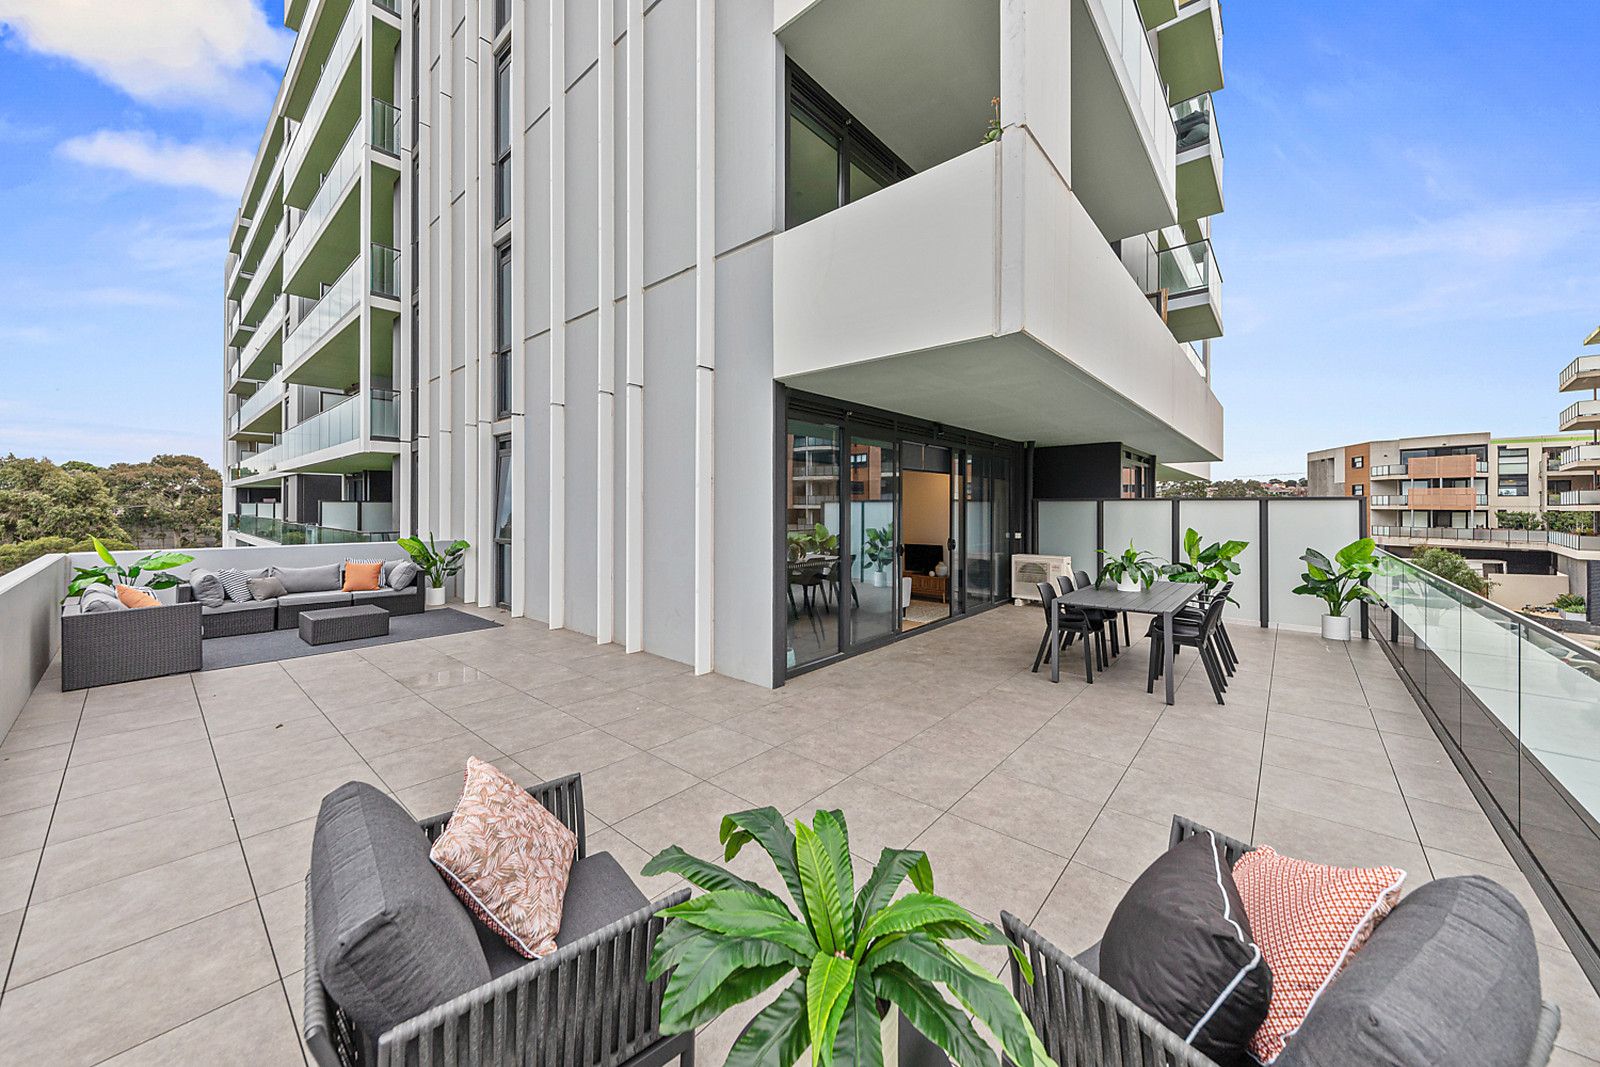 2 bedrooms Apartment / Unit / Flat in 204/5 Olive York Way BRUNSWICK WEST VIC, 3055